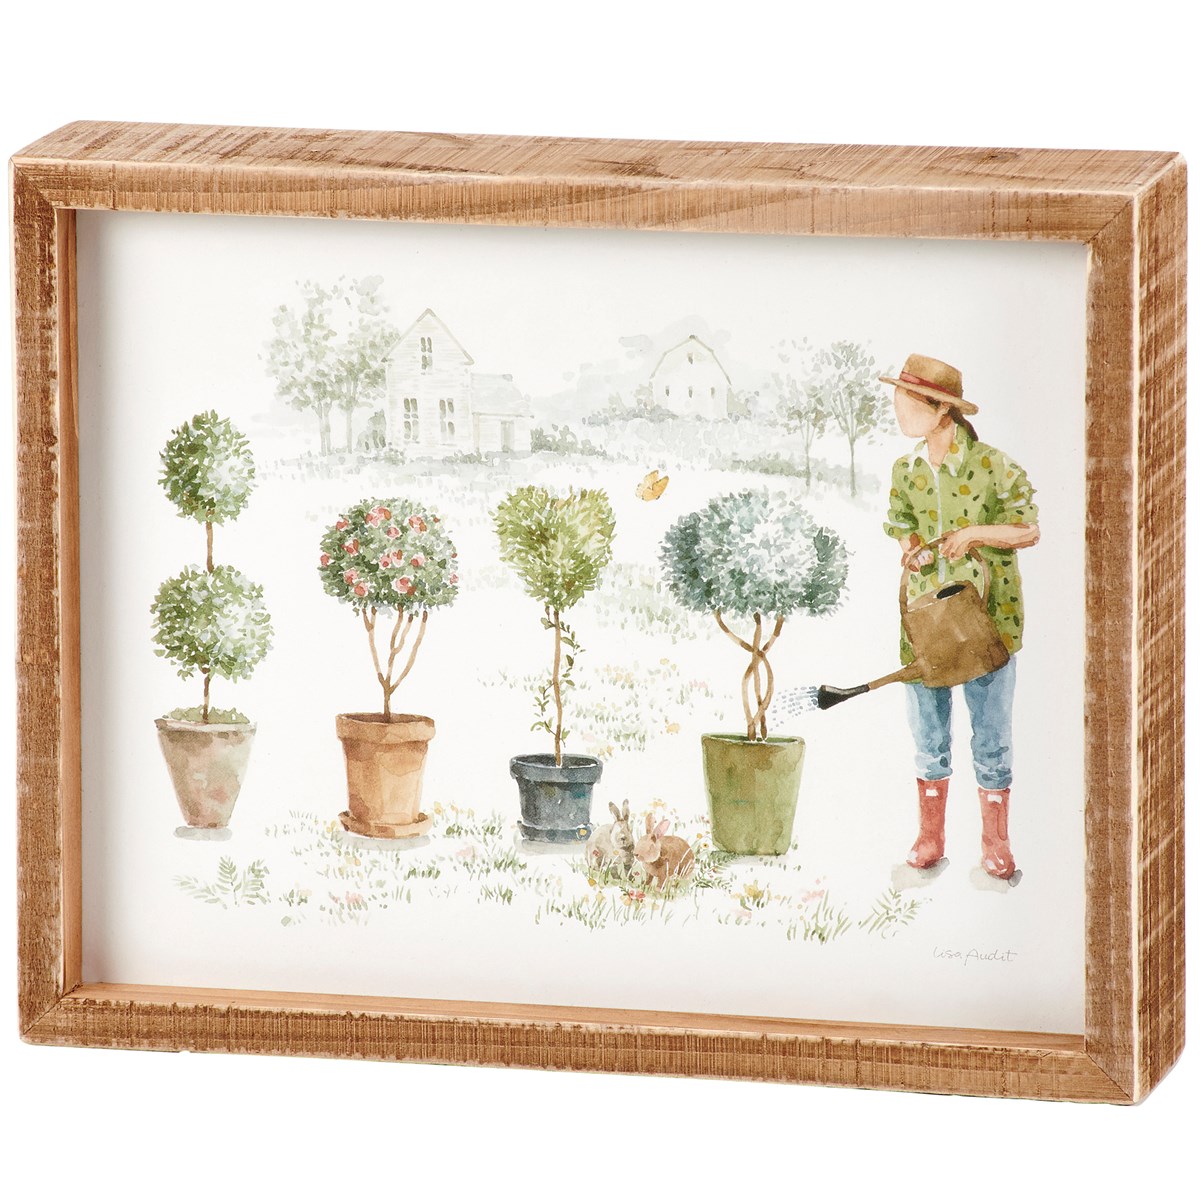 Topiary Inset Box Sign - Wood, Paper